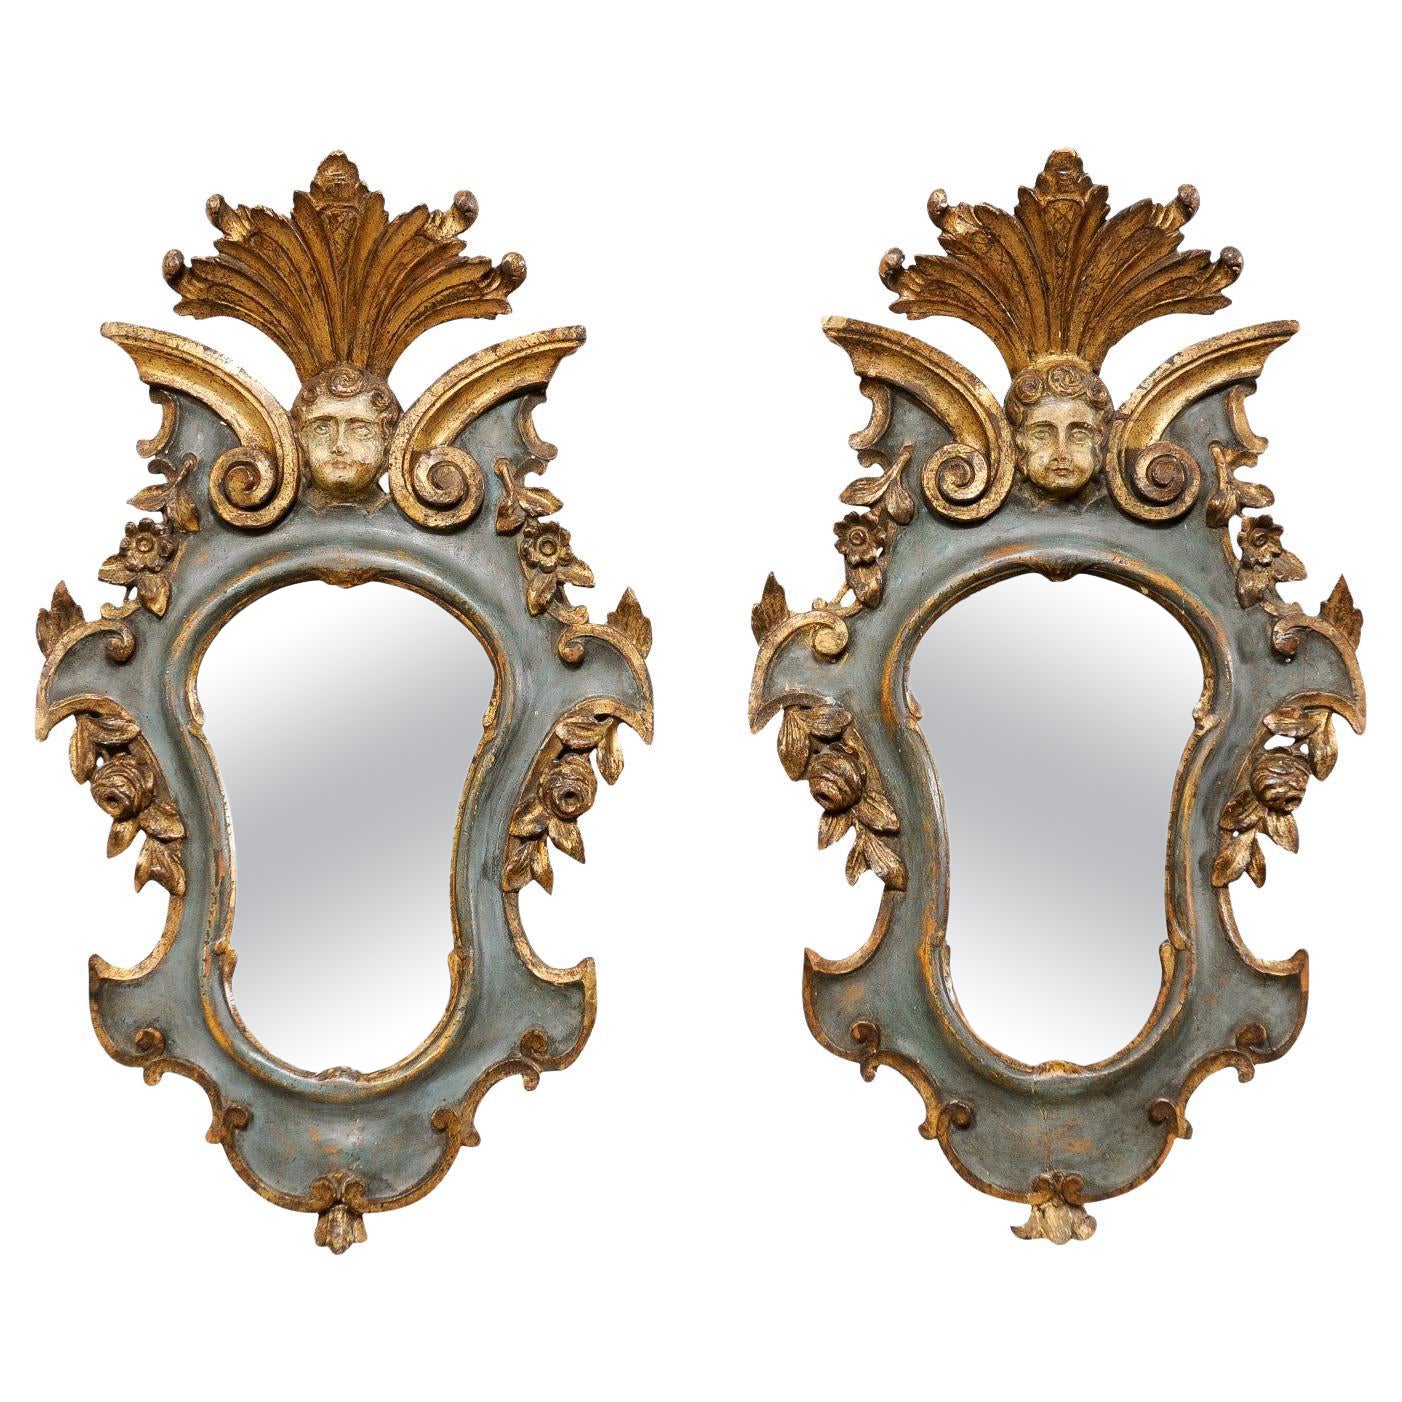 Italian Pair of 19th C. Rococo Style Carved Wall Mirrors w/Original Finish